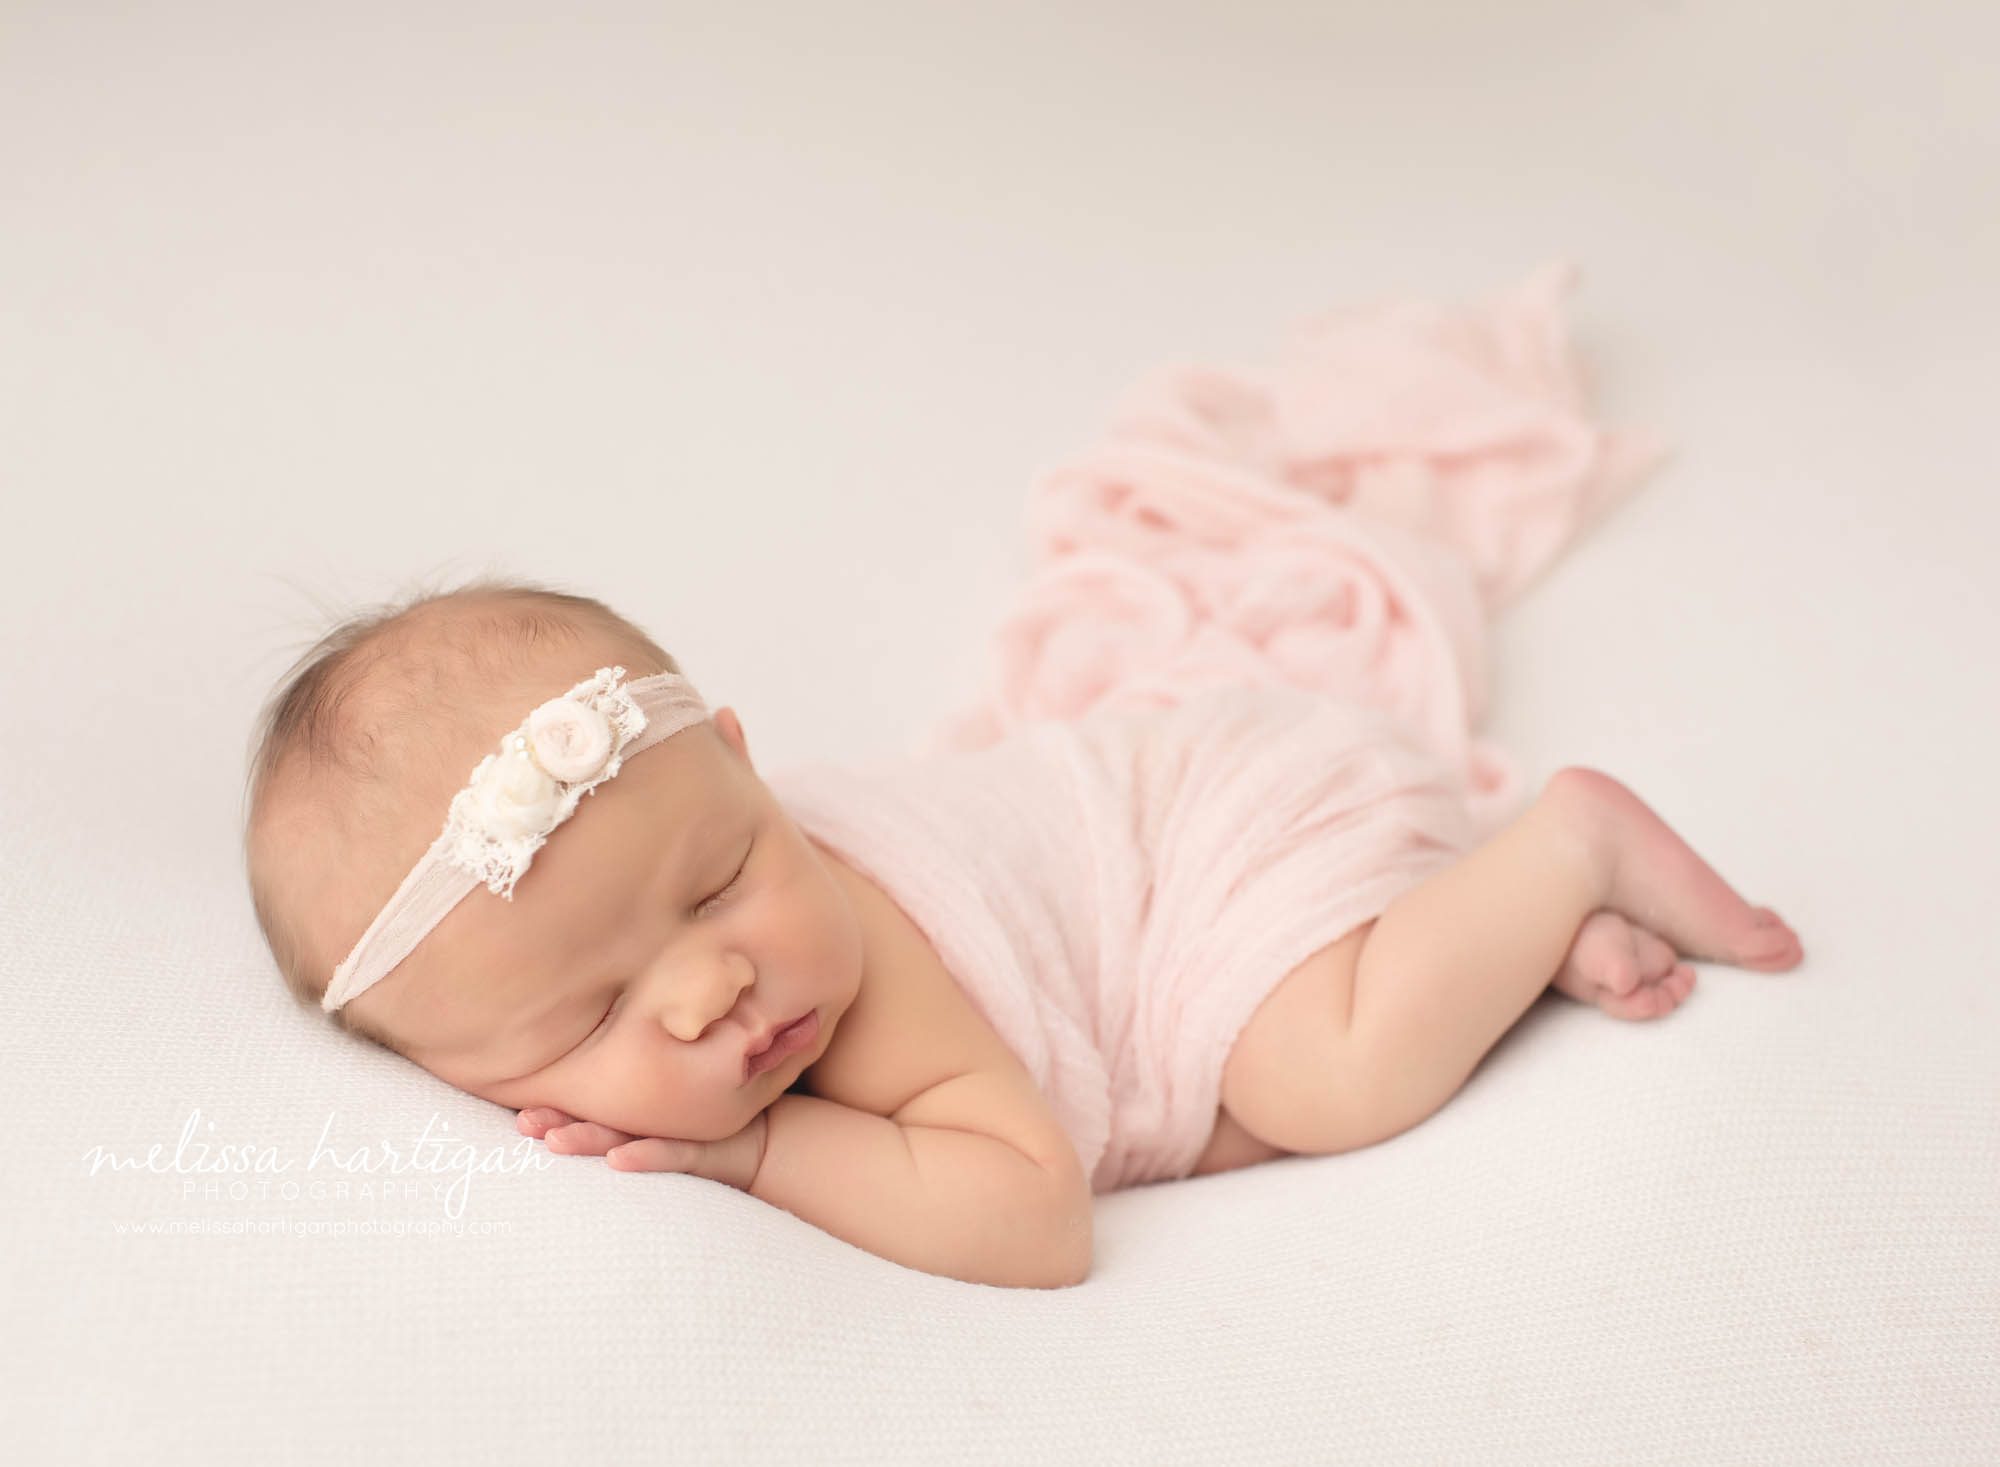 Baby girl posed on light backdrop with baby pink wrap and flower headband